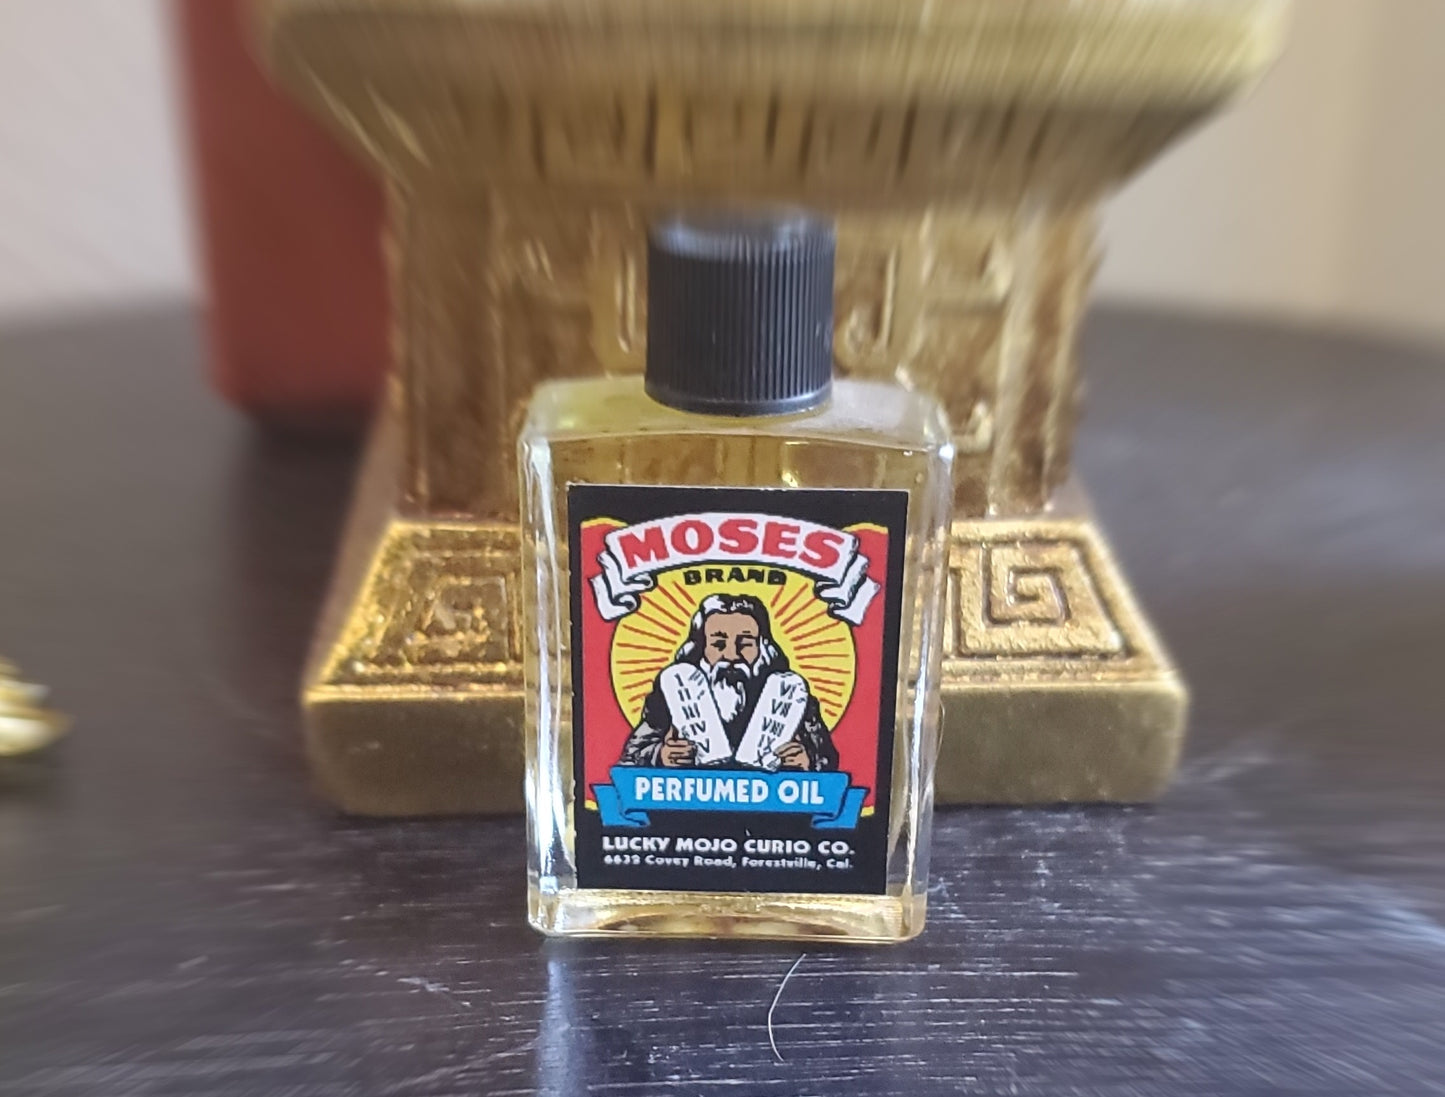 LuckyMojoCurioCo "Moses Oil" Anointing / Conjure Oil #GreatDeal #LuckyMojoCurioCo #LuckyMojo #EffectiveOils #MustHave